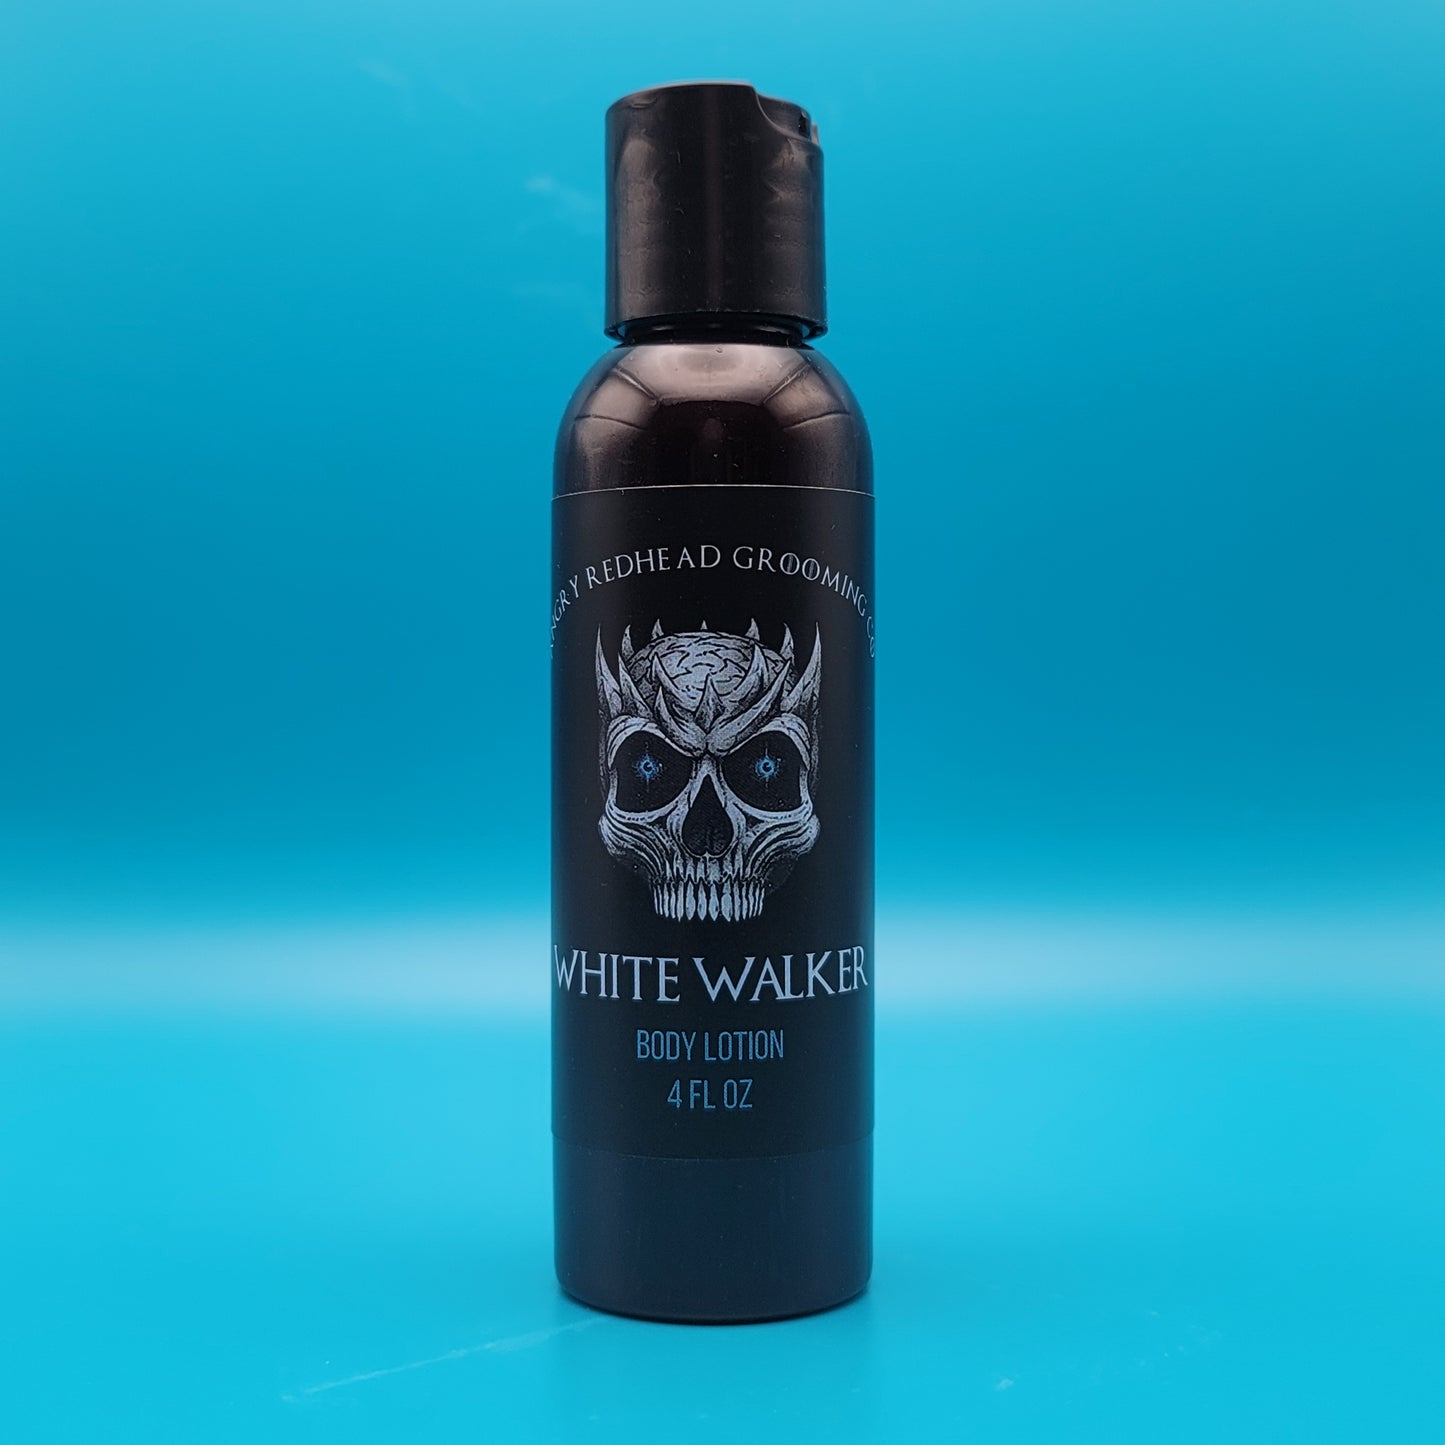 White Walker Body Lotion by Angry Redhead Grooming Co - angryredheadgrooming.com